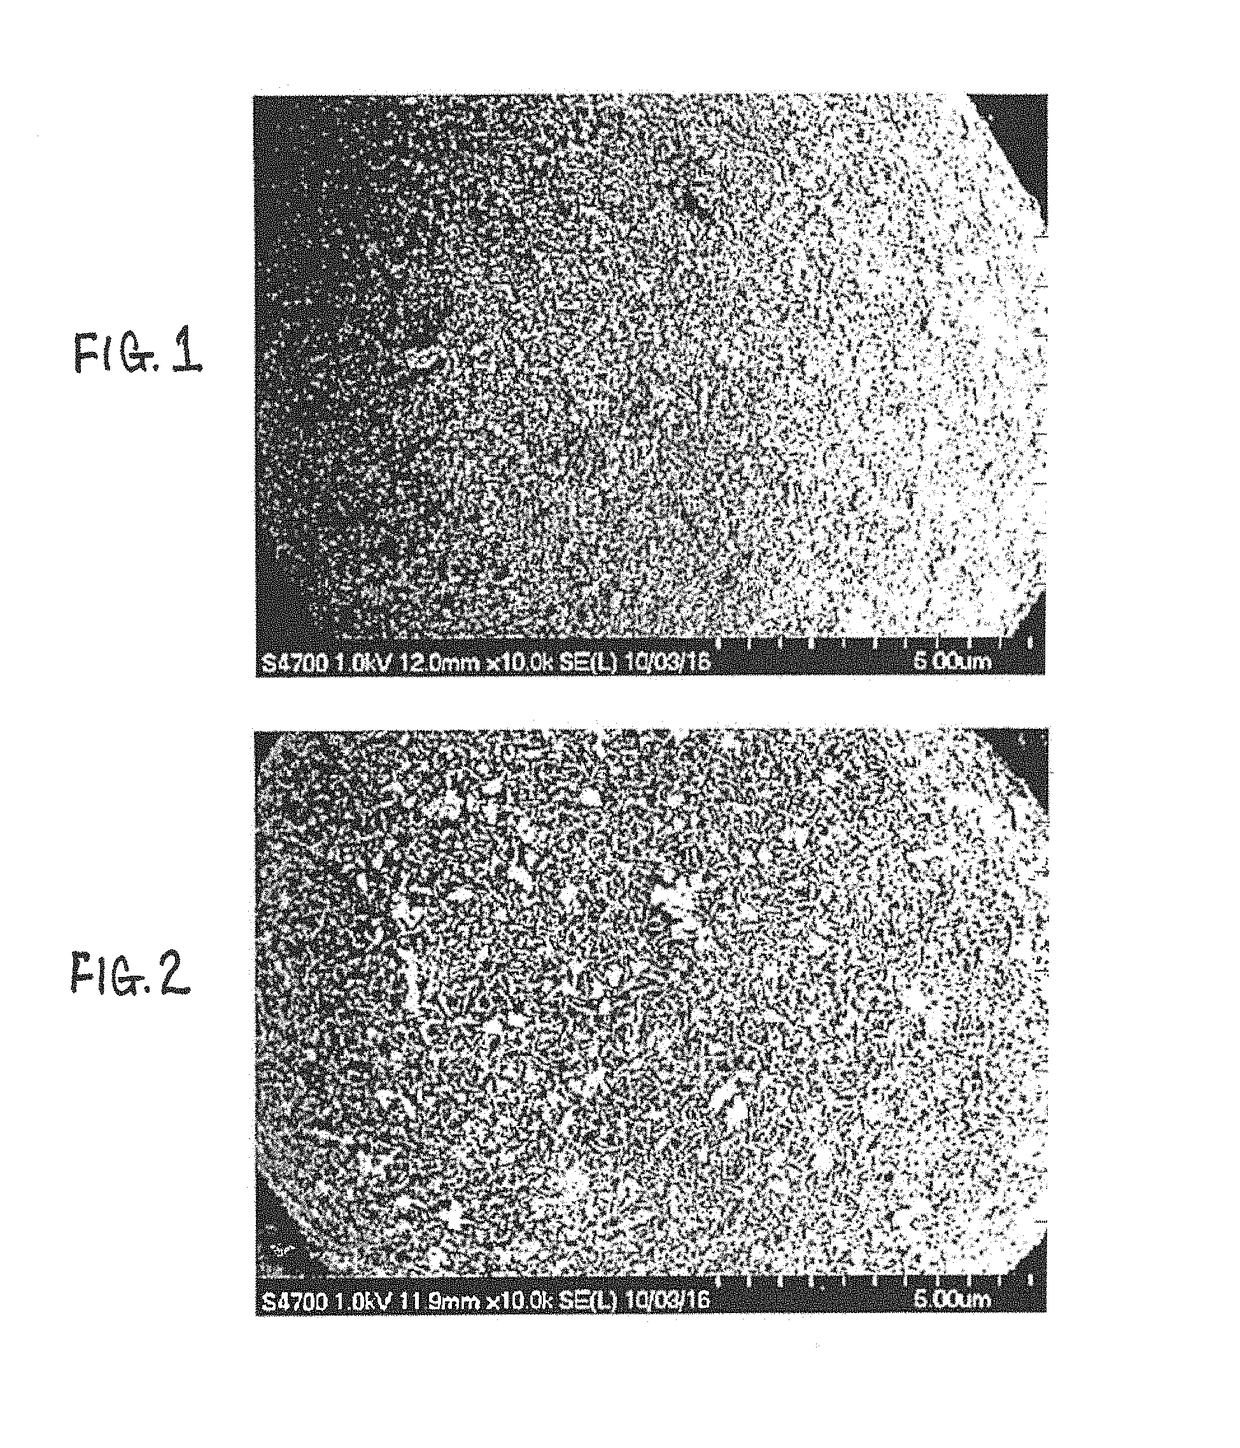 Coated nickel hydroxide powder for positive electrode active material for alkaline secondary battery, and production method therefor